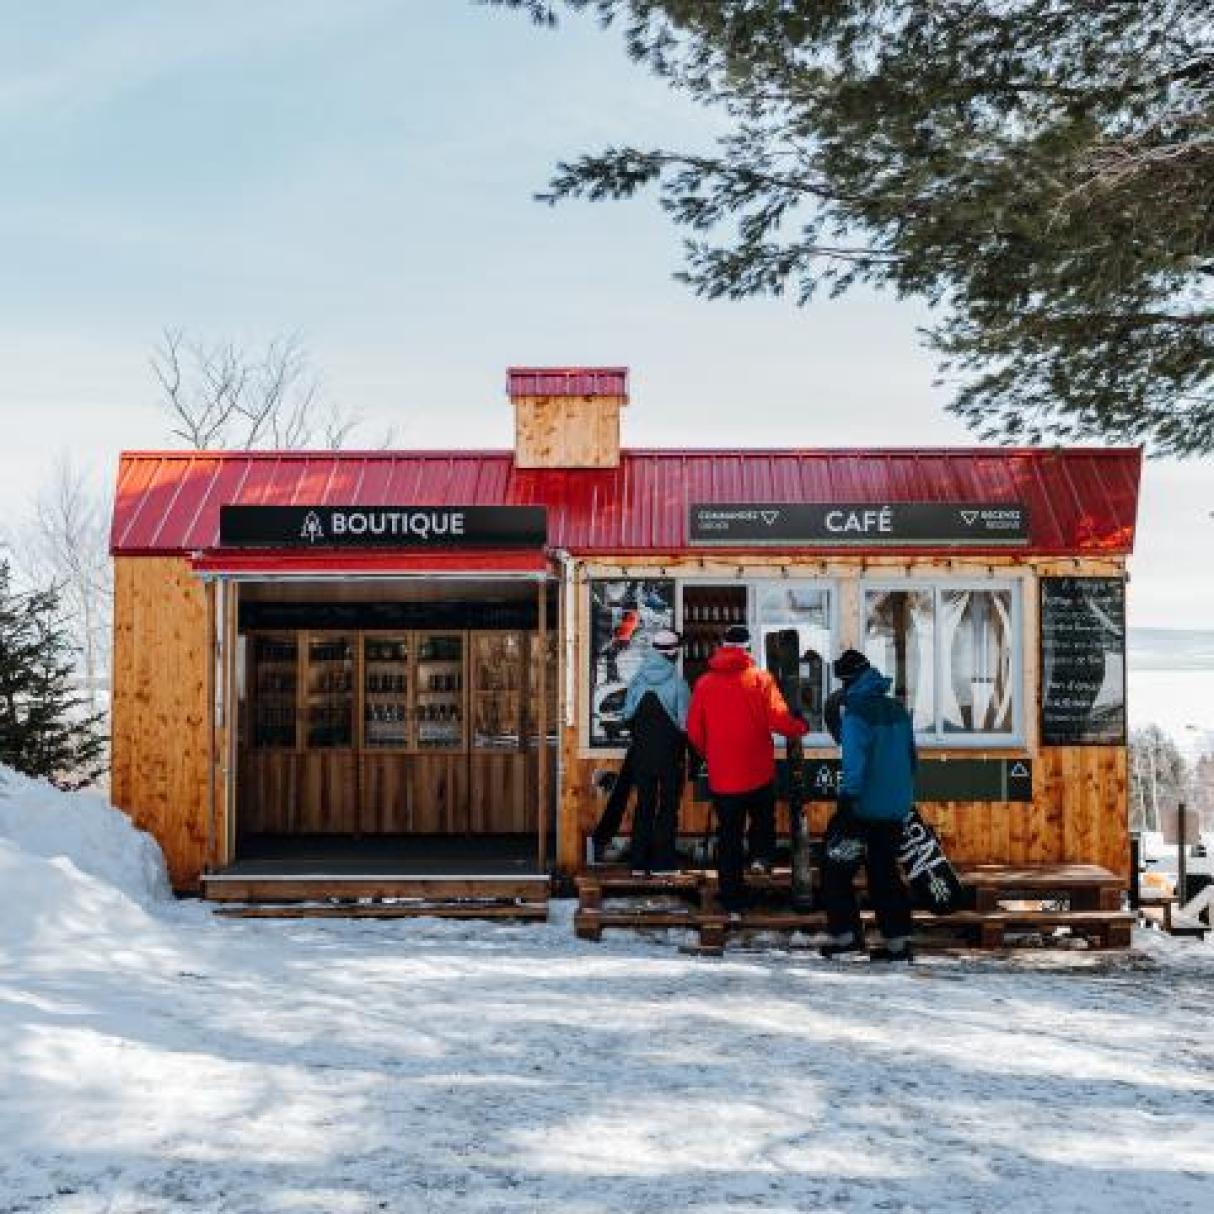 Skiers at an outdoor cafe at Le Massif ski resort